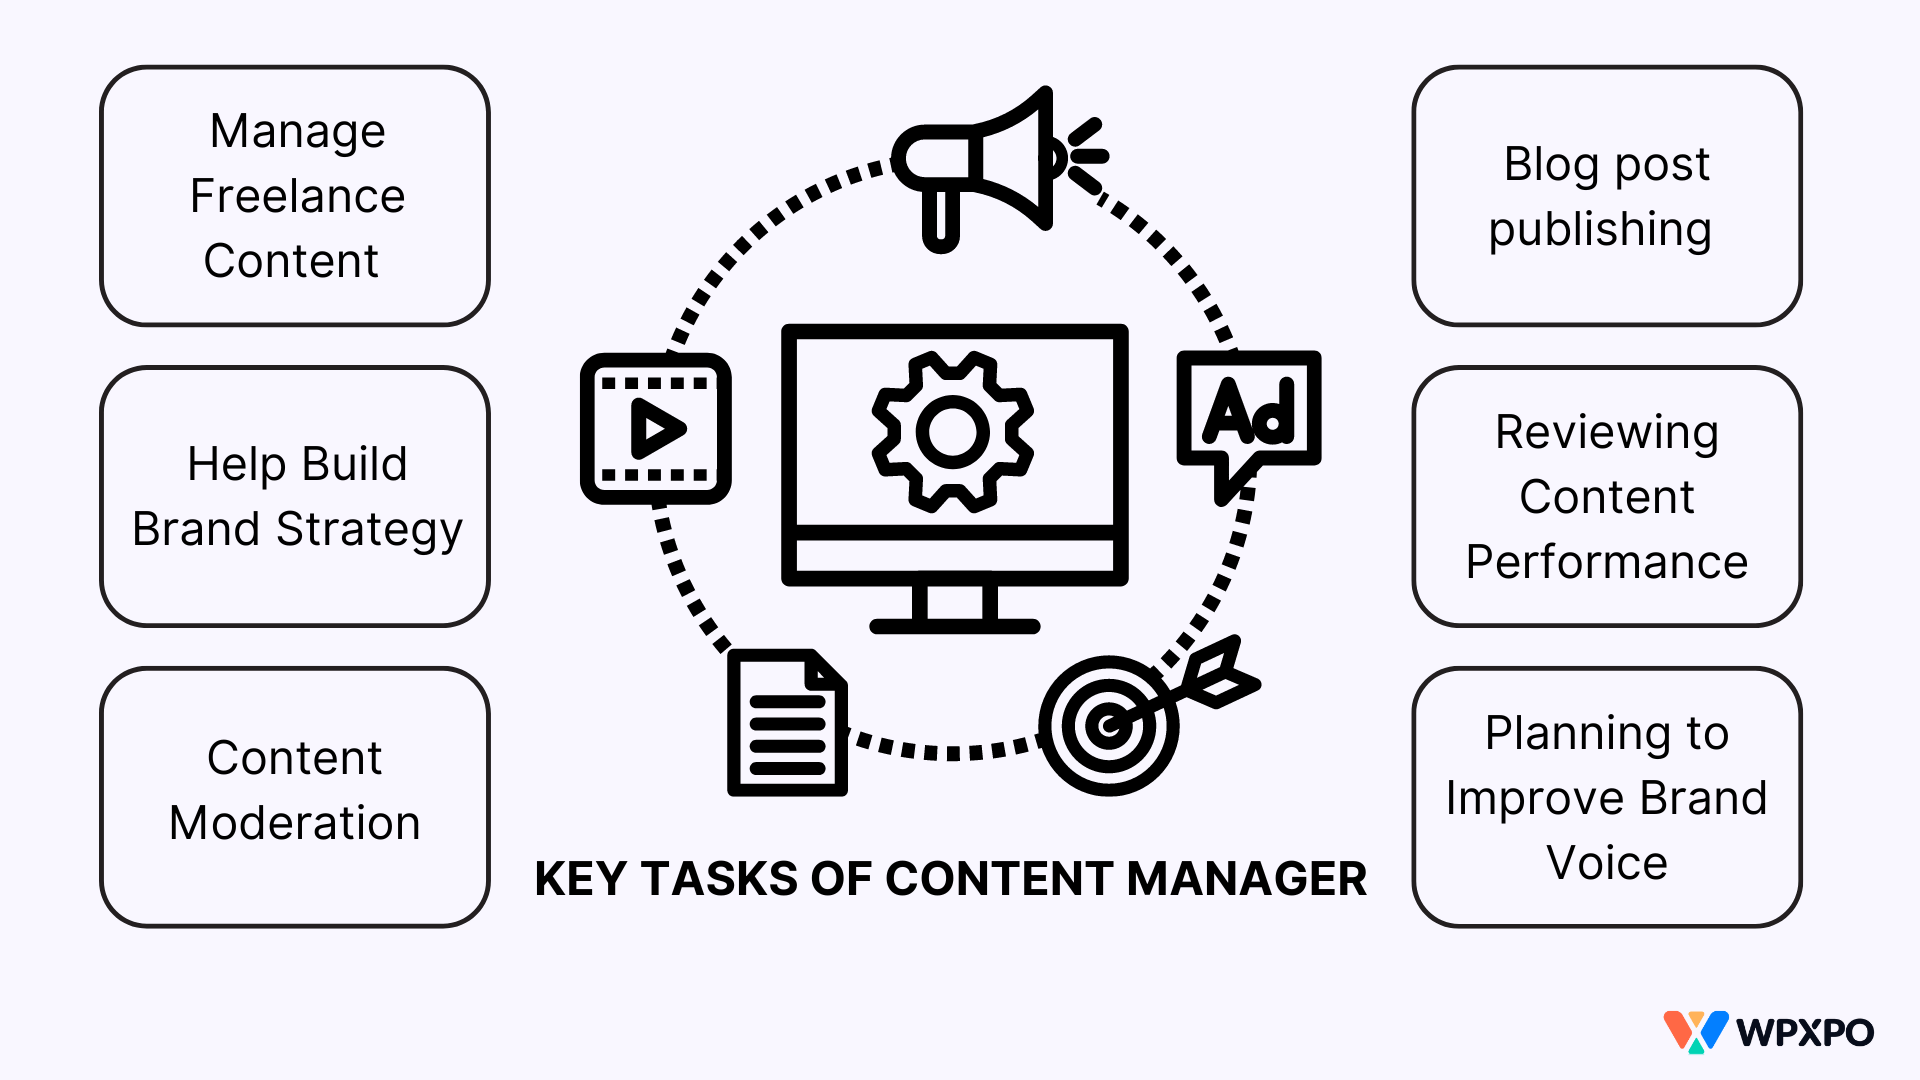 Key Tasks of a Content Manager